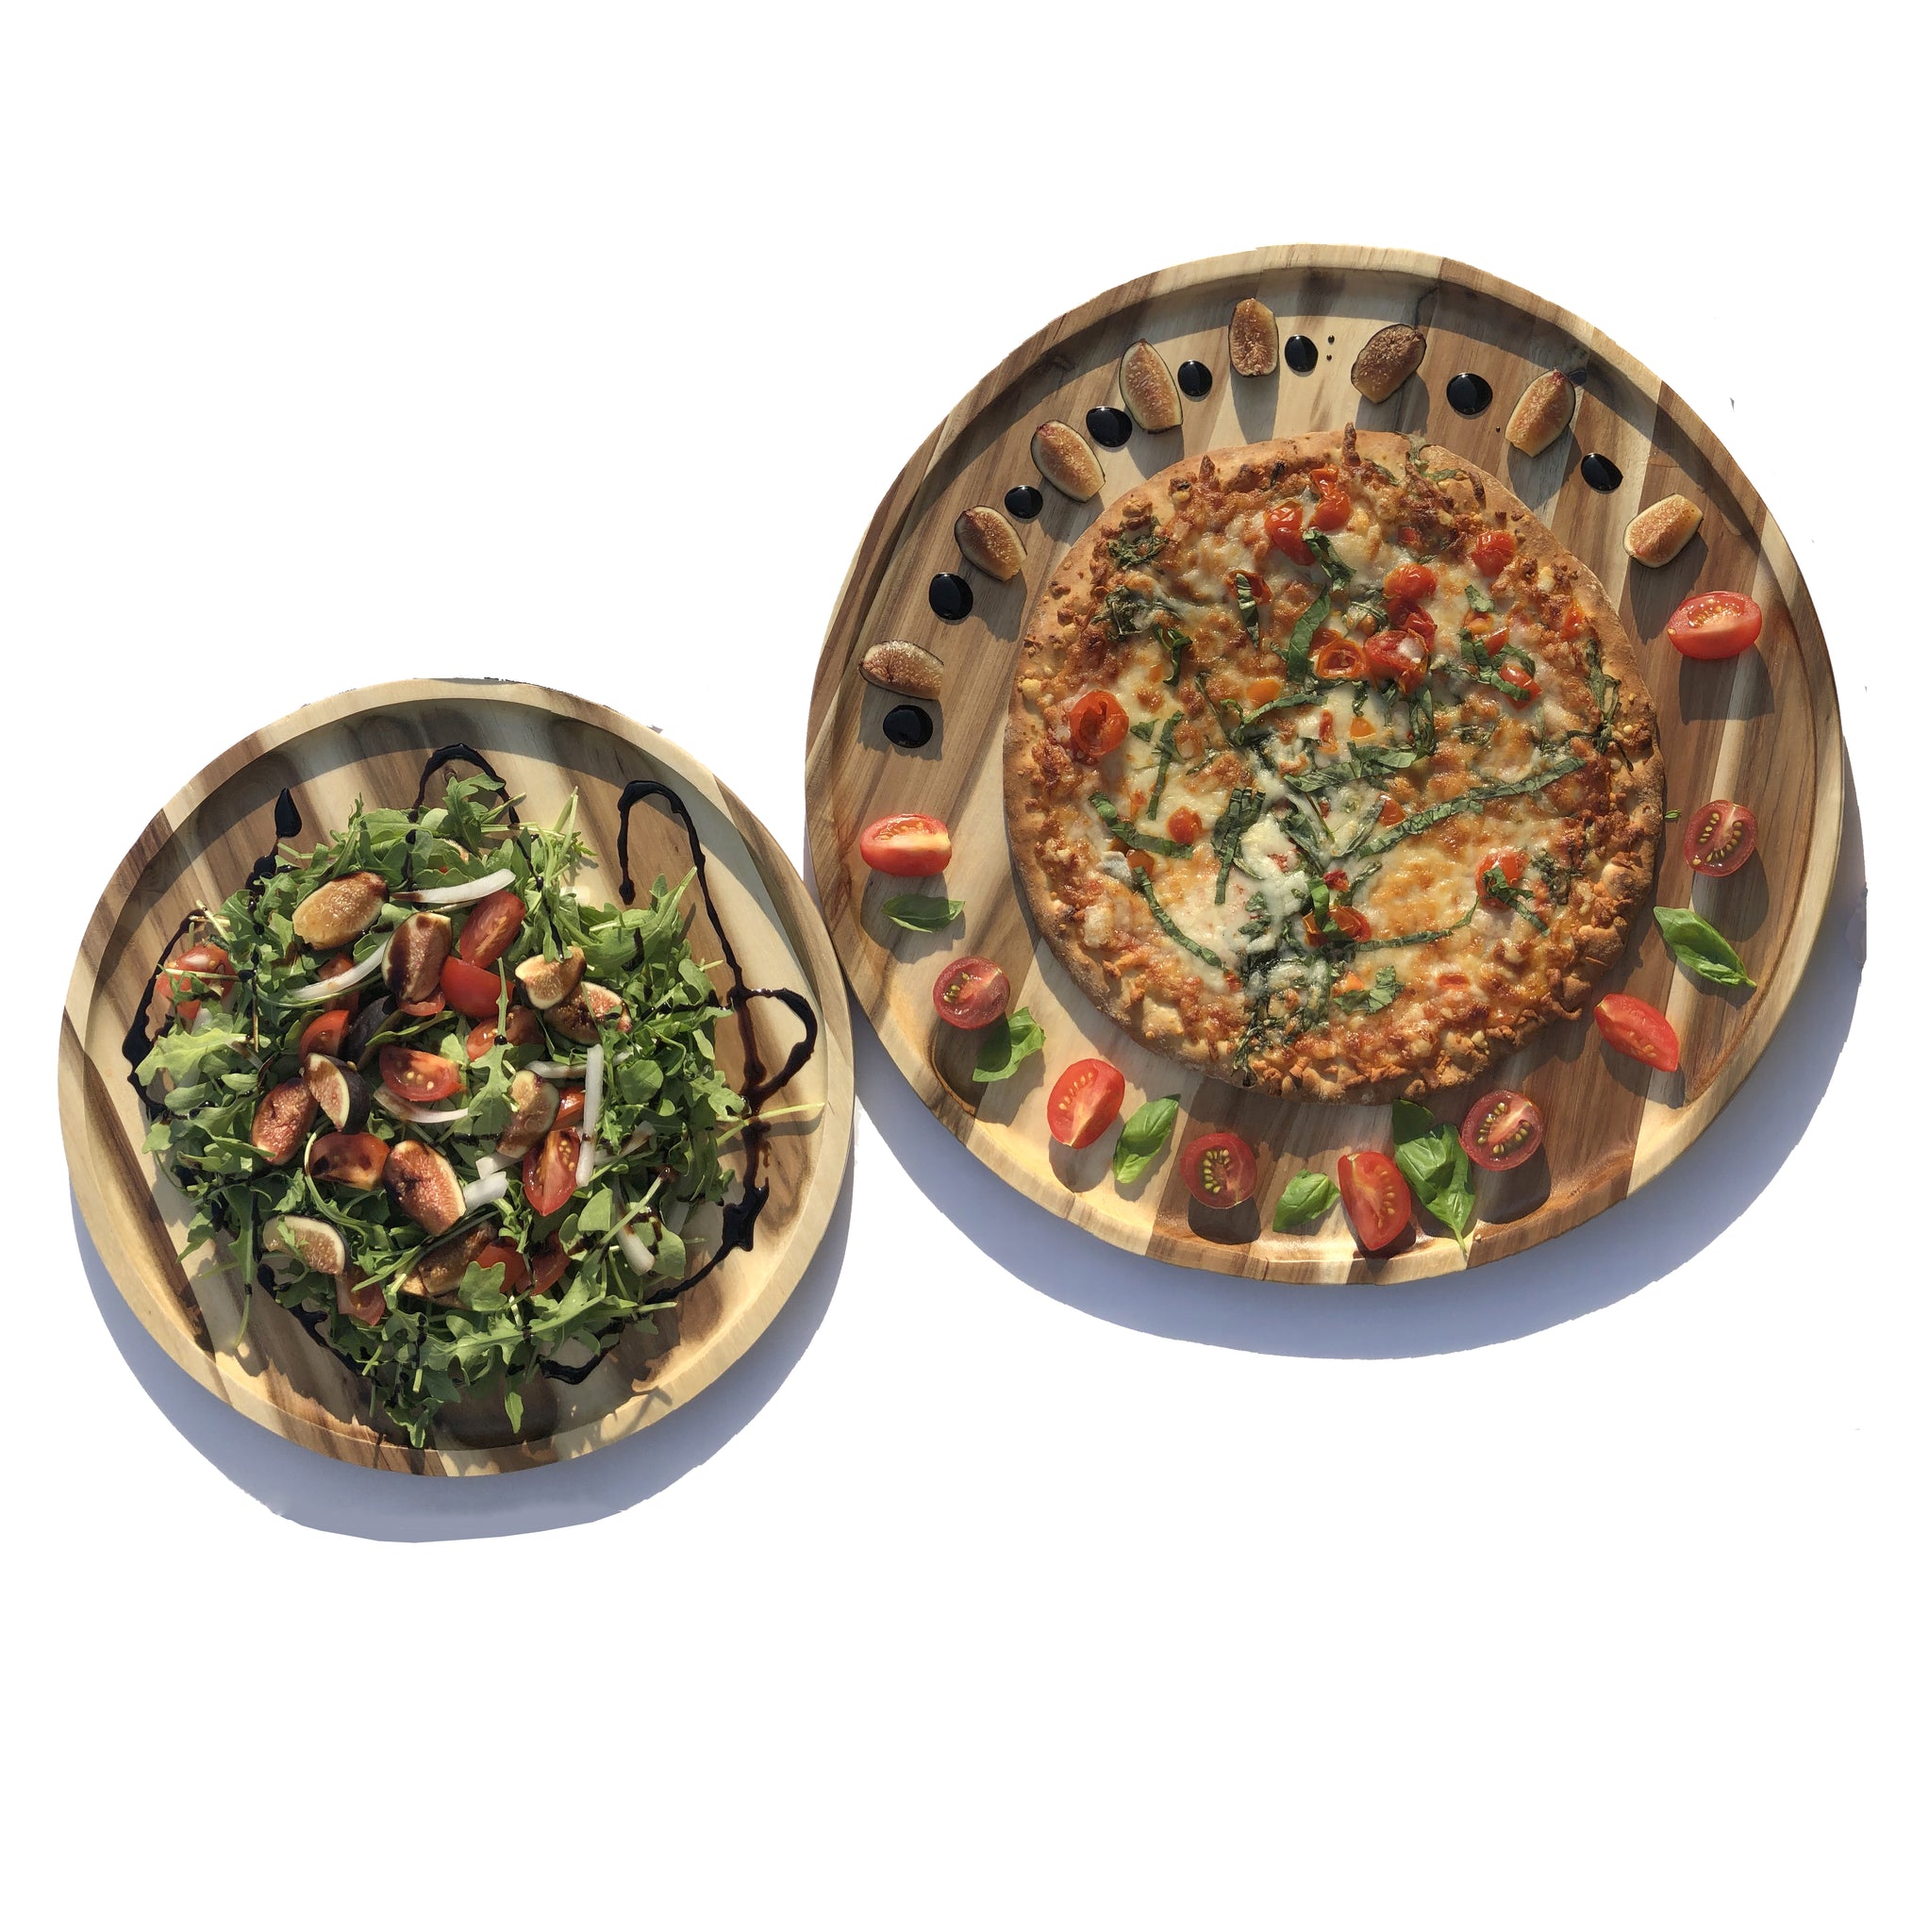 2 Large-sized Acacia platters for Pizza and Salad party serving set(16” and 12”)